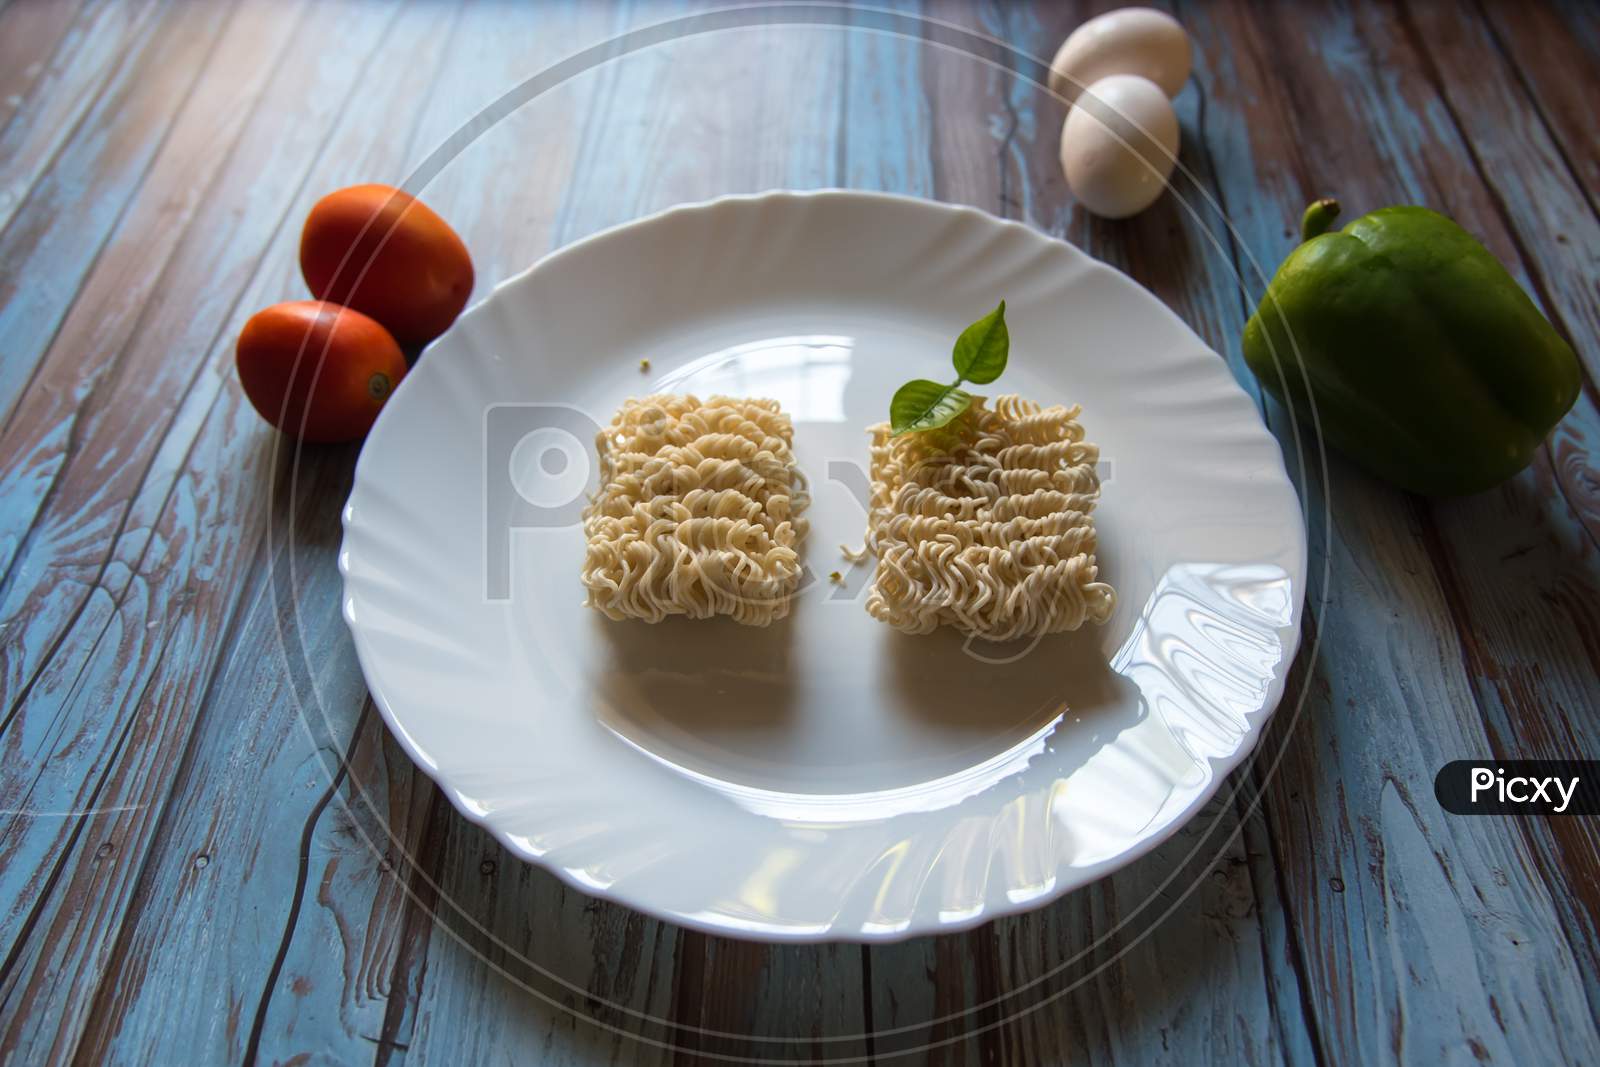 A plate of uncooked ramen noodles